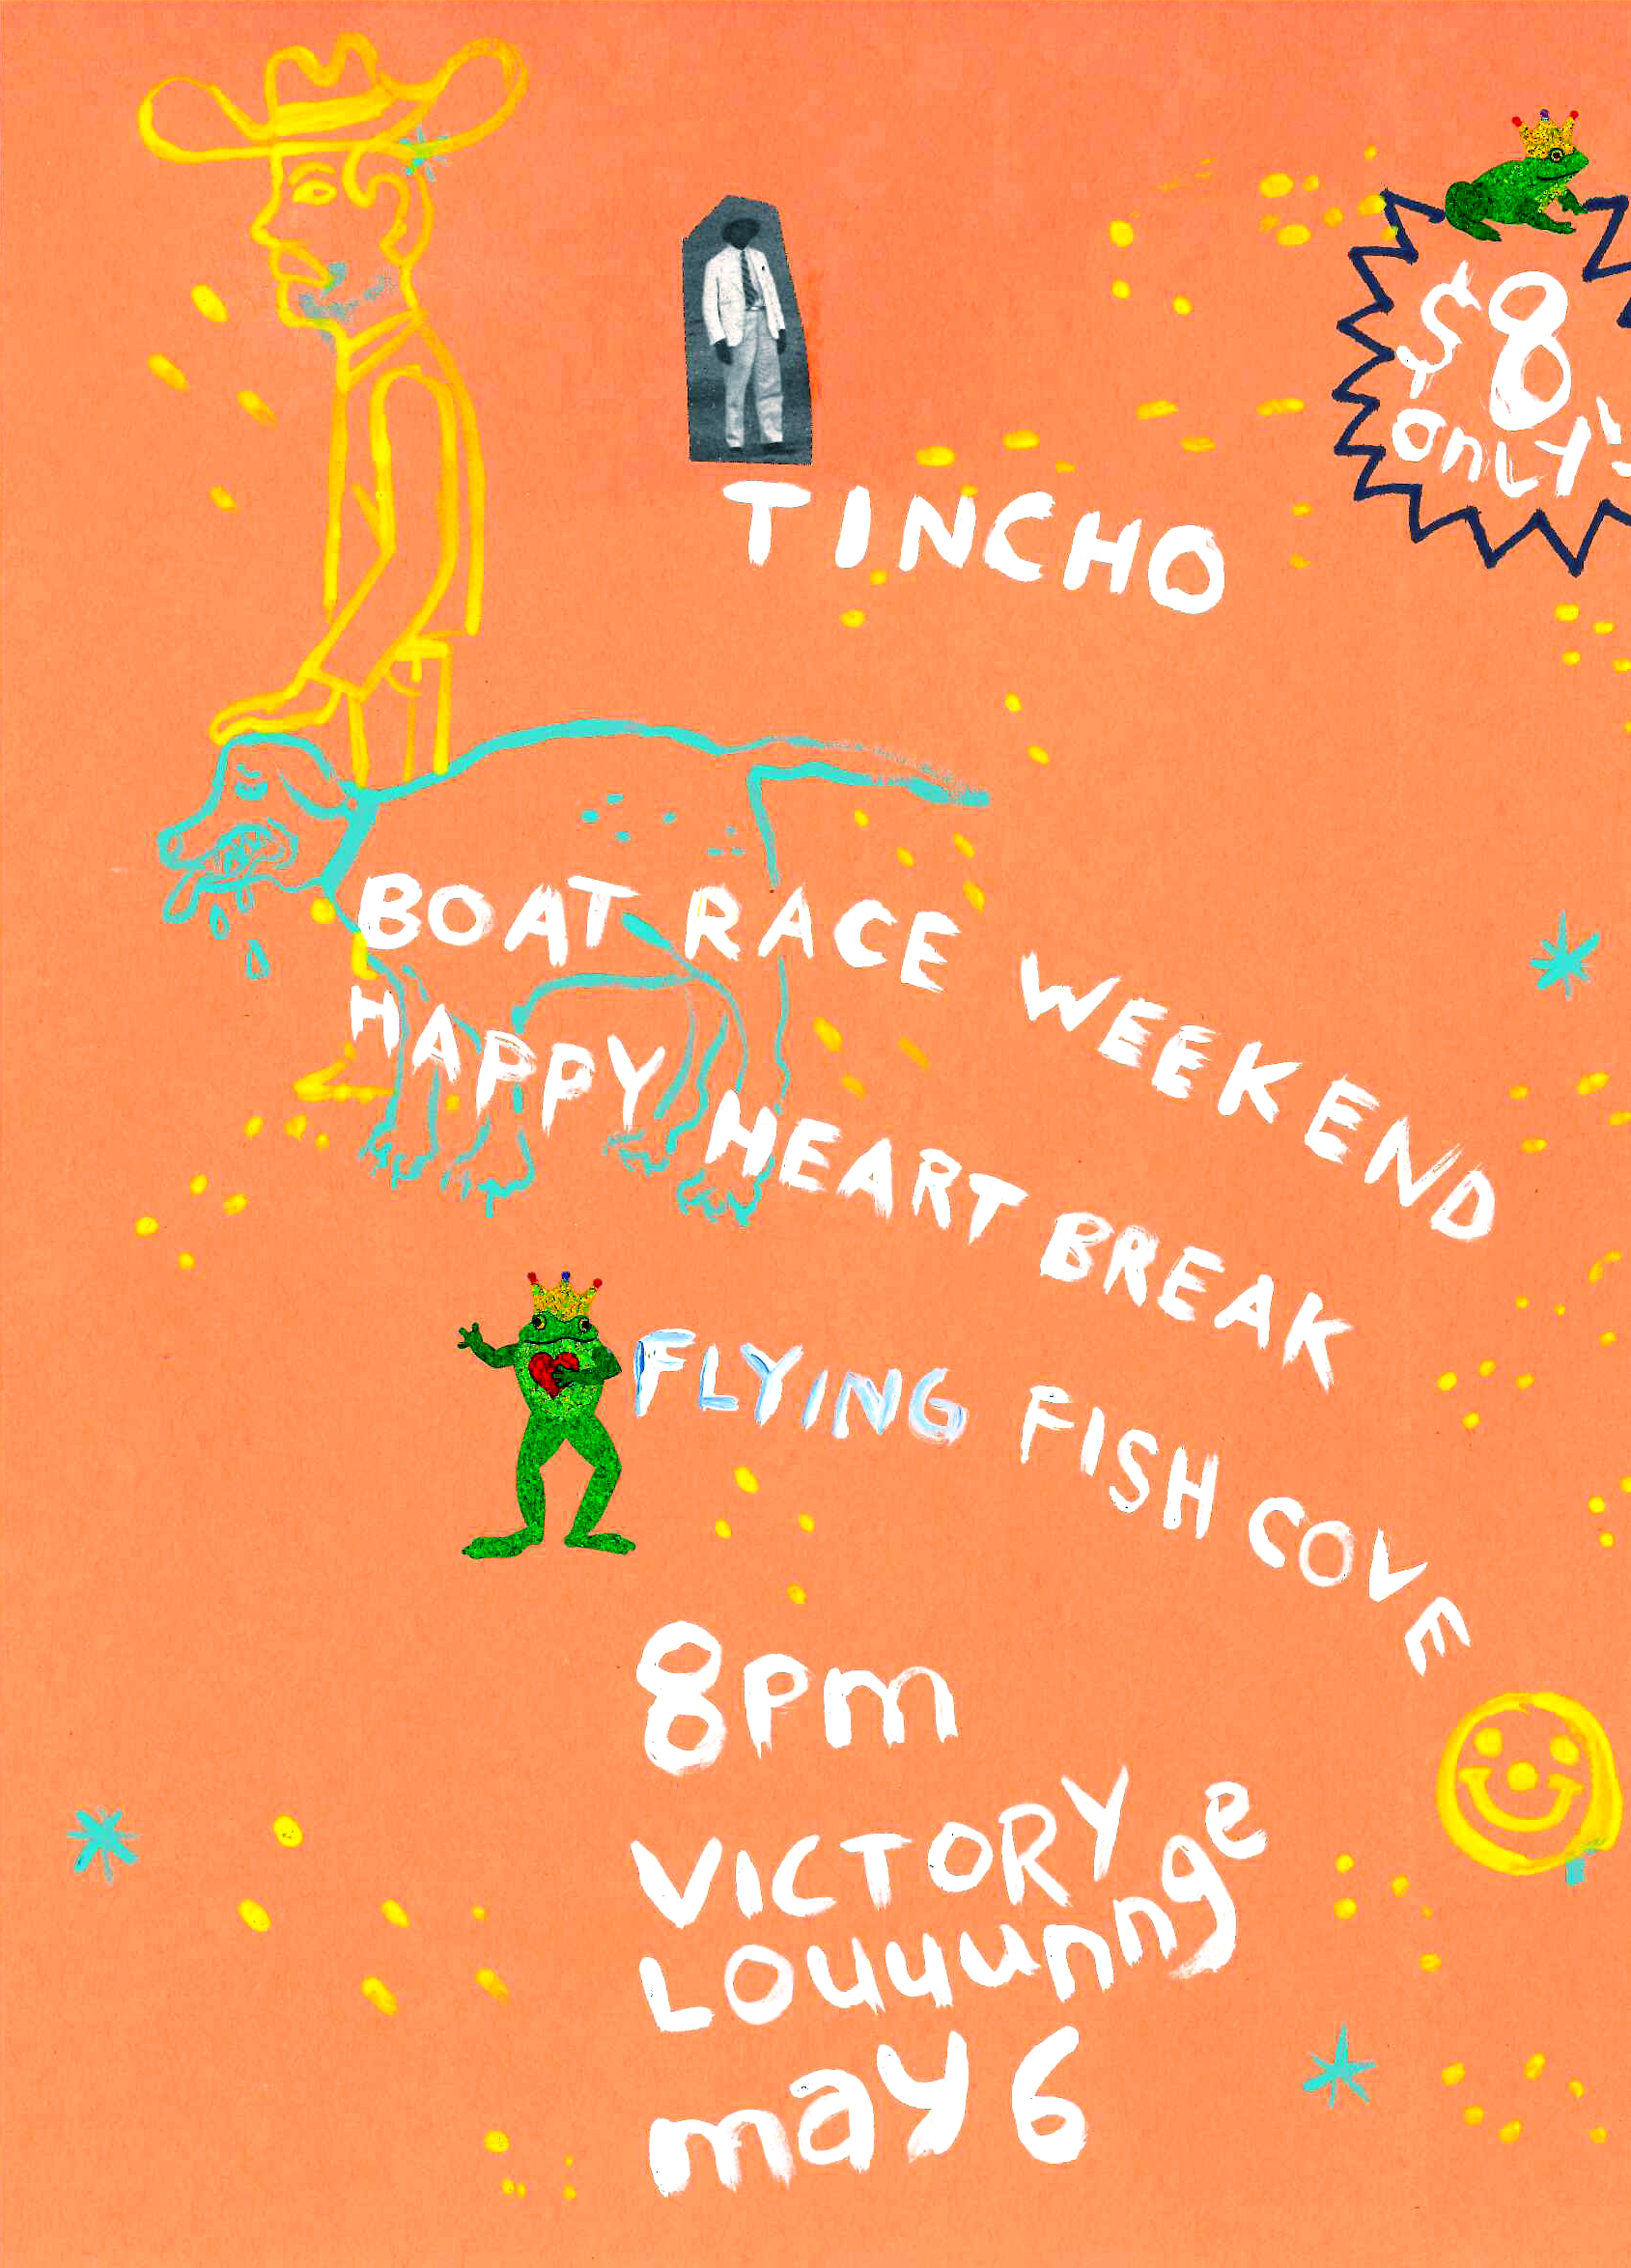 tincho / boat race weekend / happy heartbreak / flying fish cove // victory lounge may 6th (2017)